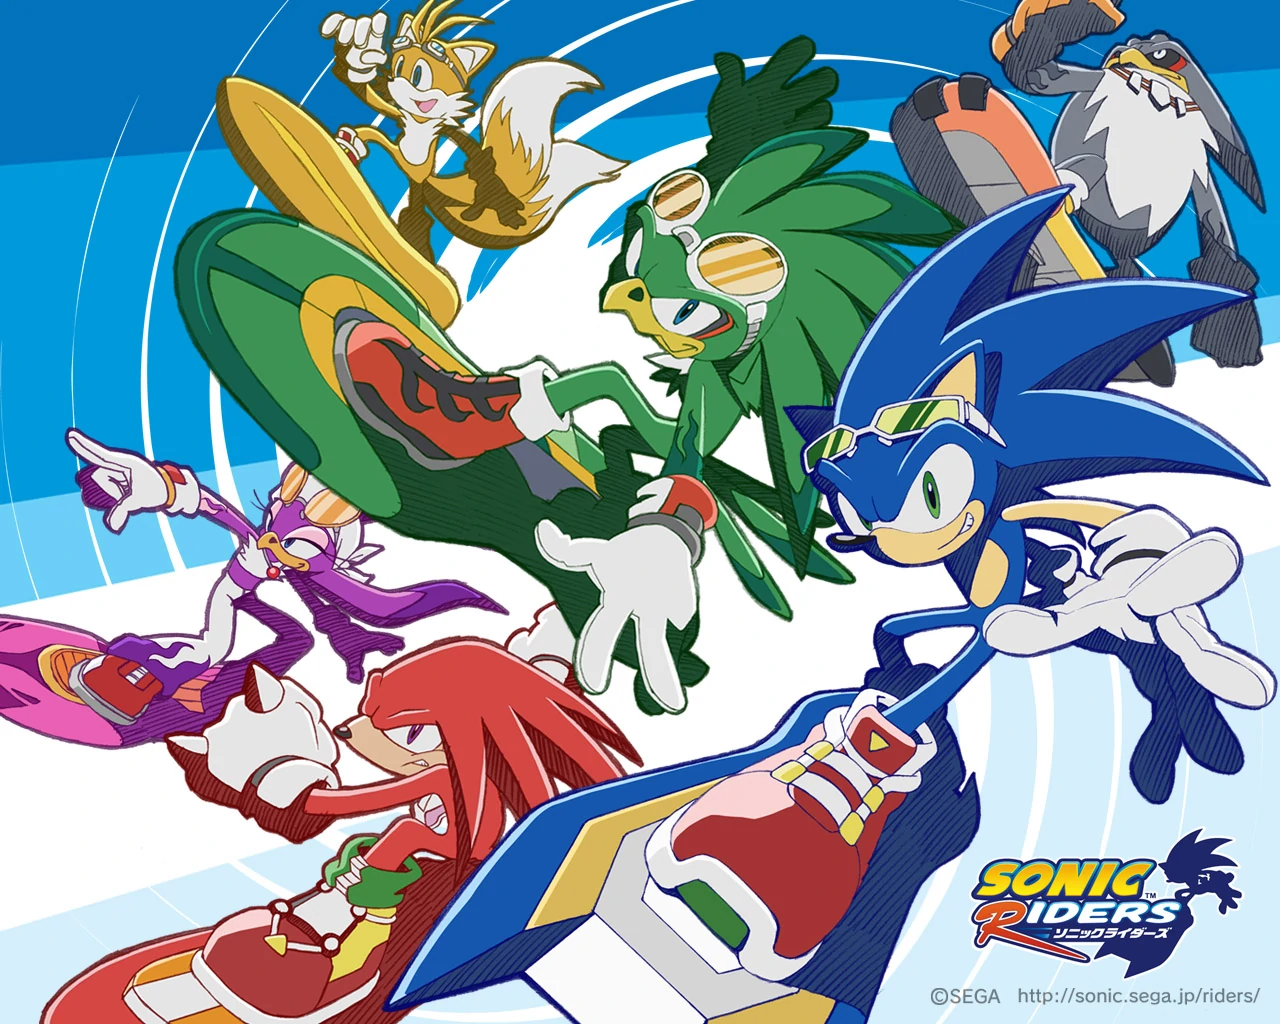 2006 - Sonic Riders is released for the Nintendo GameCube, PlayStation 2 and Xbox in Europe.